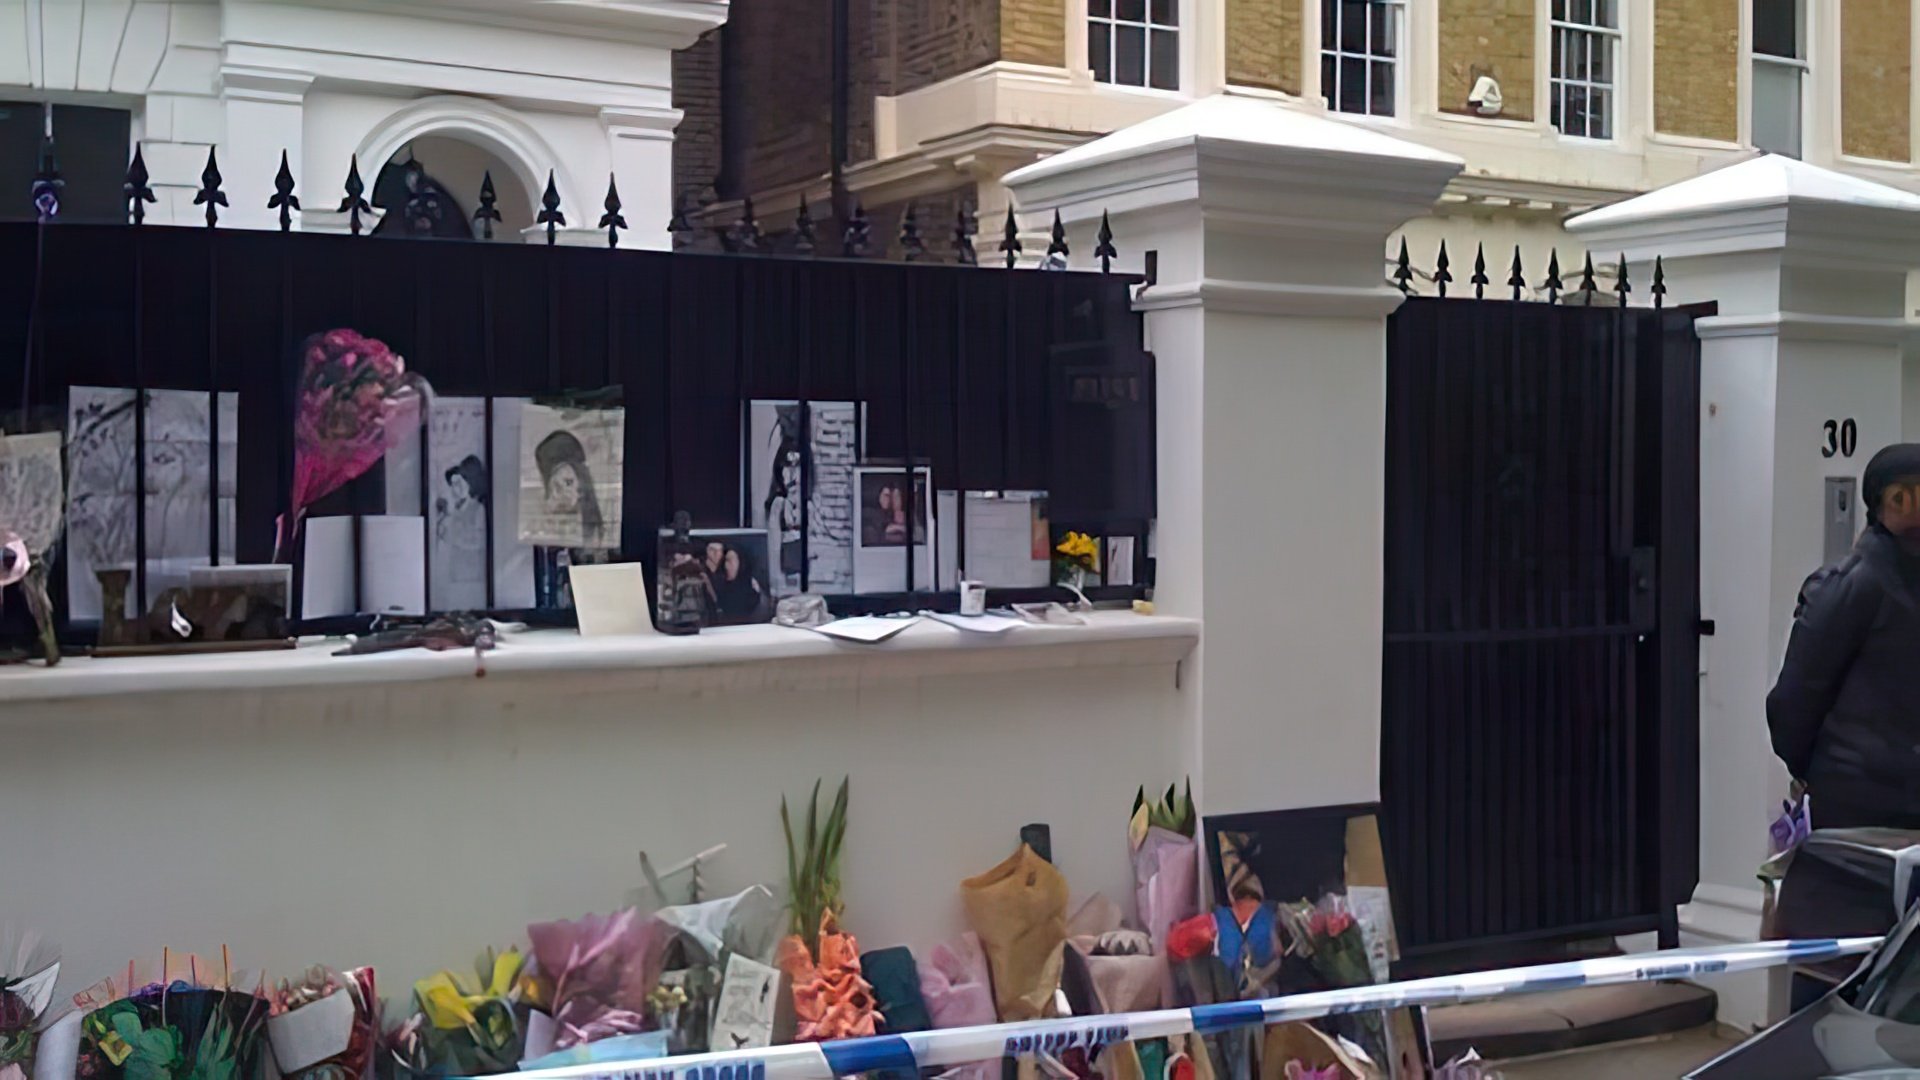 Amy Winehouse’s house where she was found dead on July 23, 2011